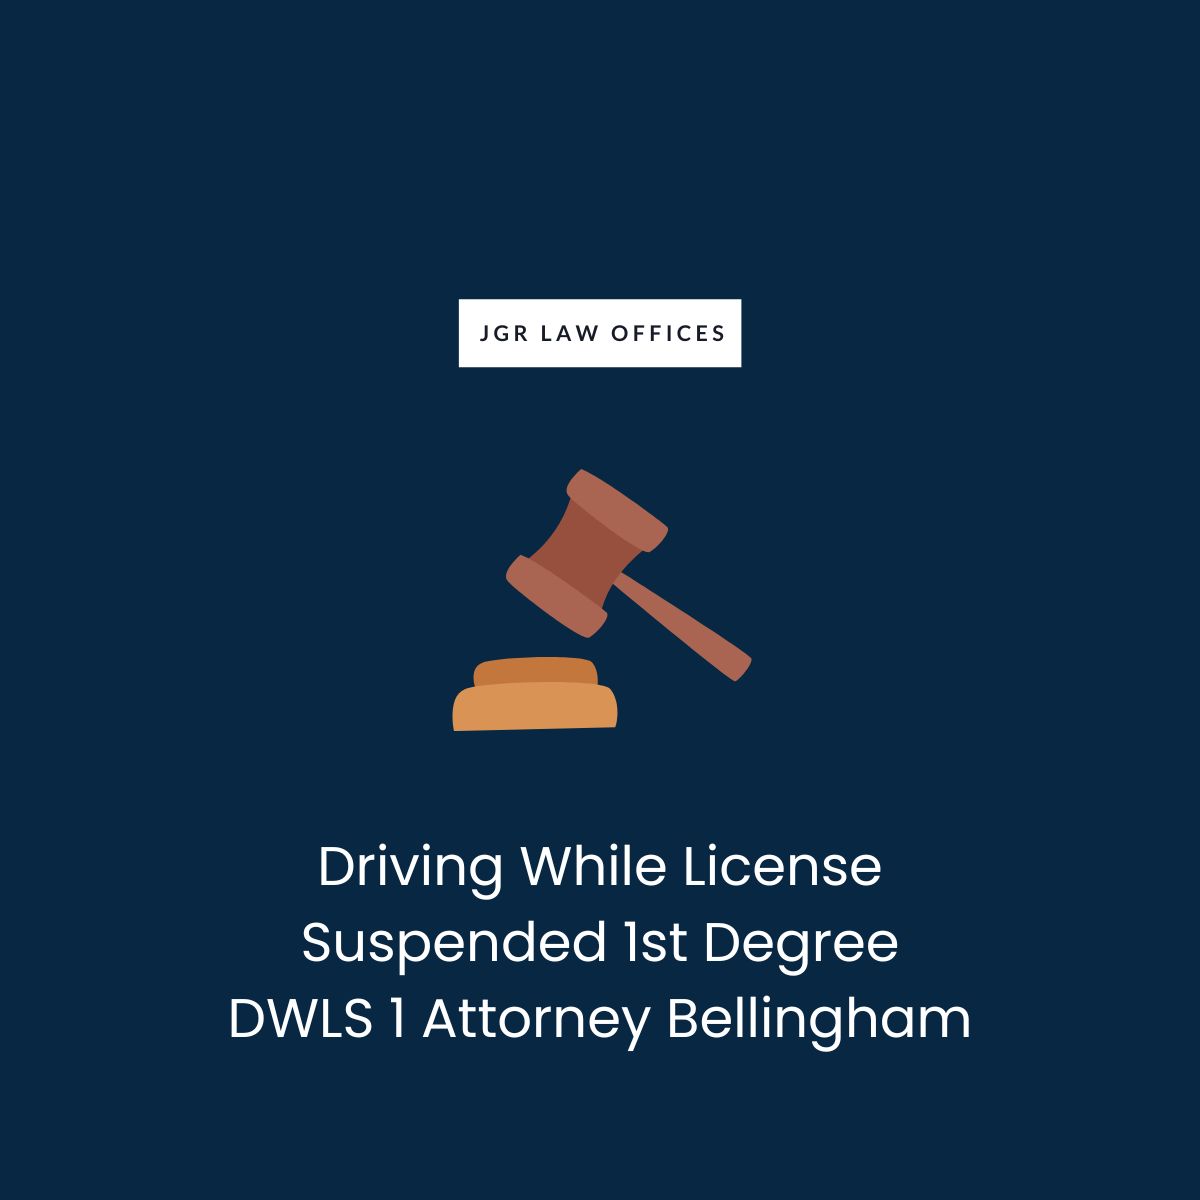 Driving While License Suspended 1st Degree DWLS 1 Attorney Bellingham